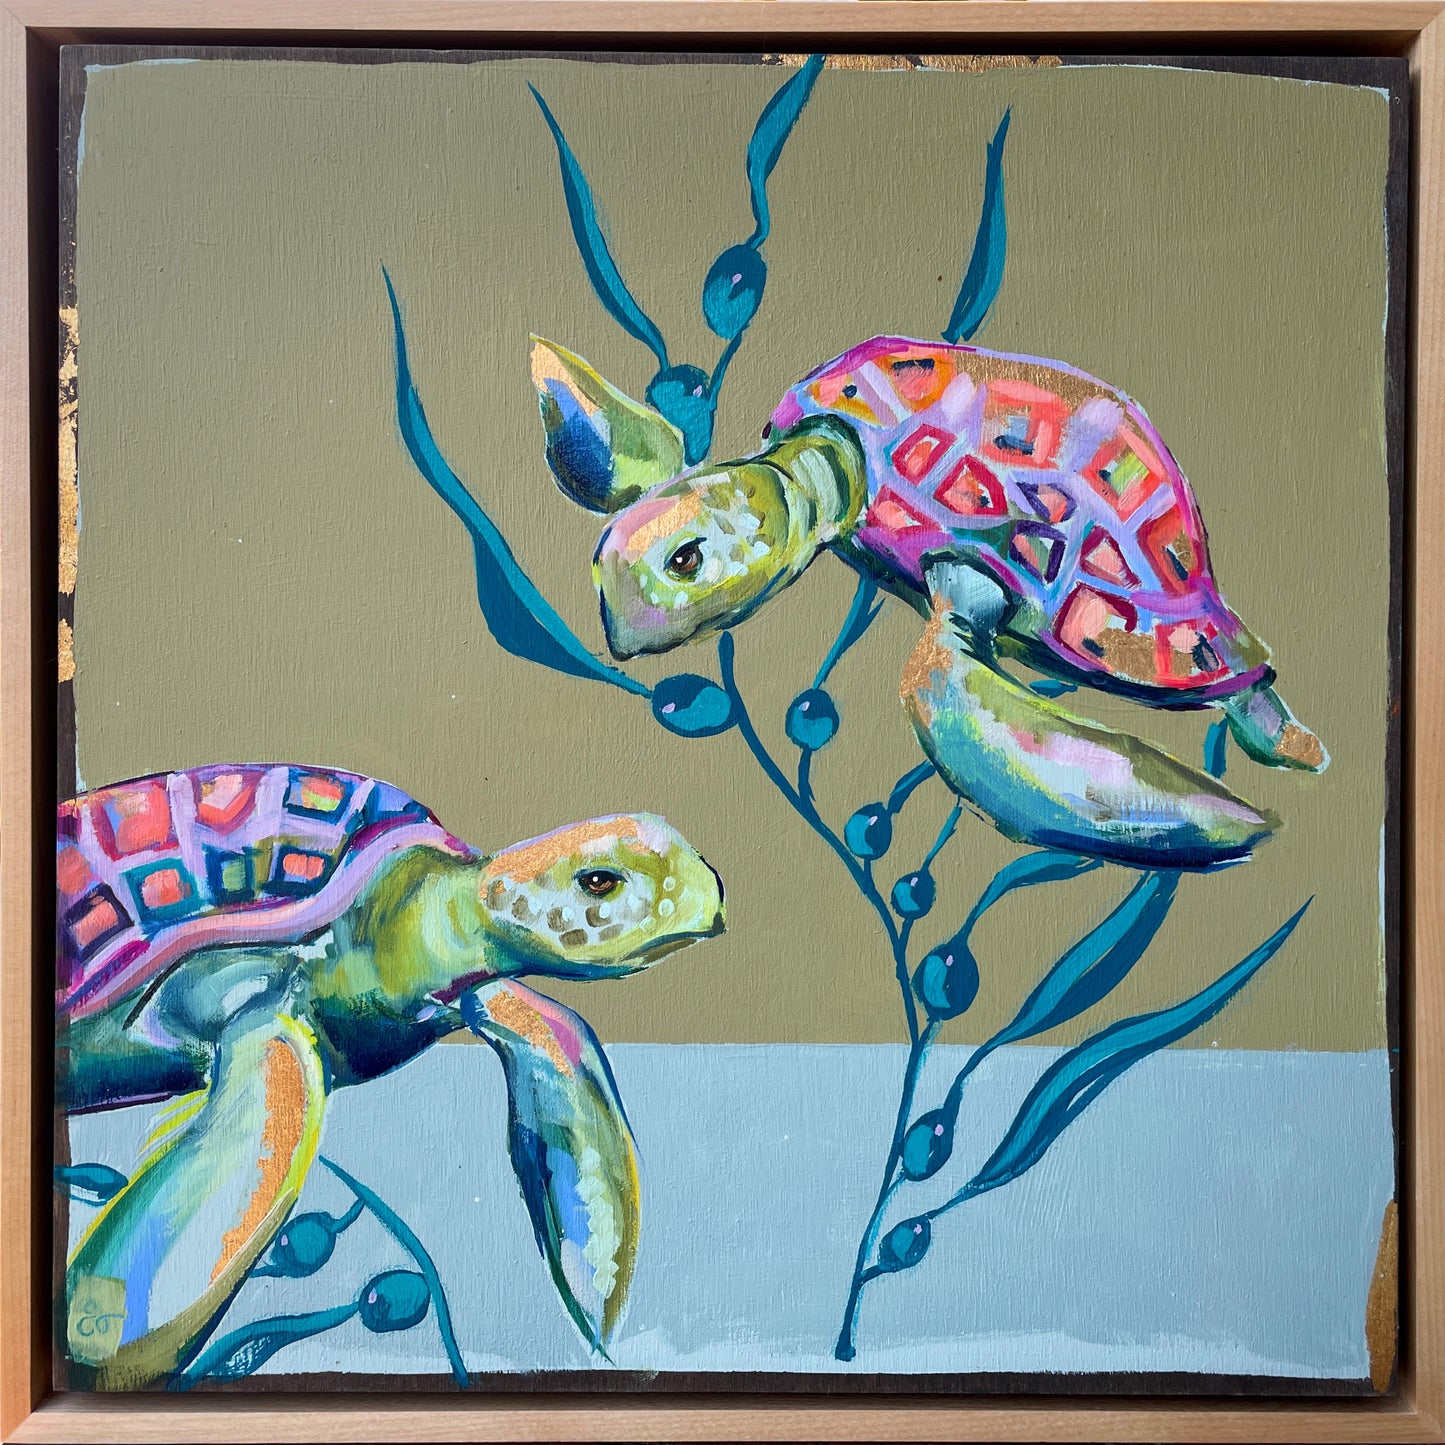 Painting of sea two sea turtles in colorful shades with gold leaf detail titled 'Shell Games' by Shaney Watters